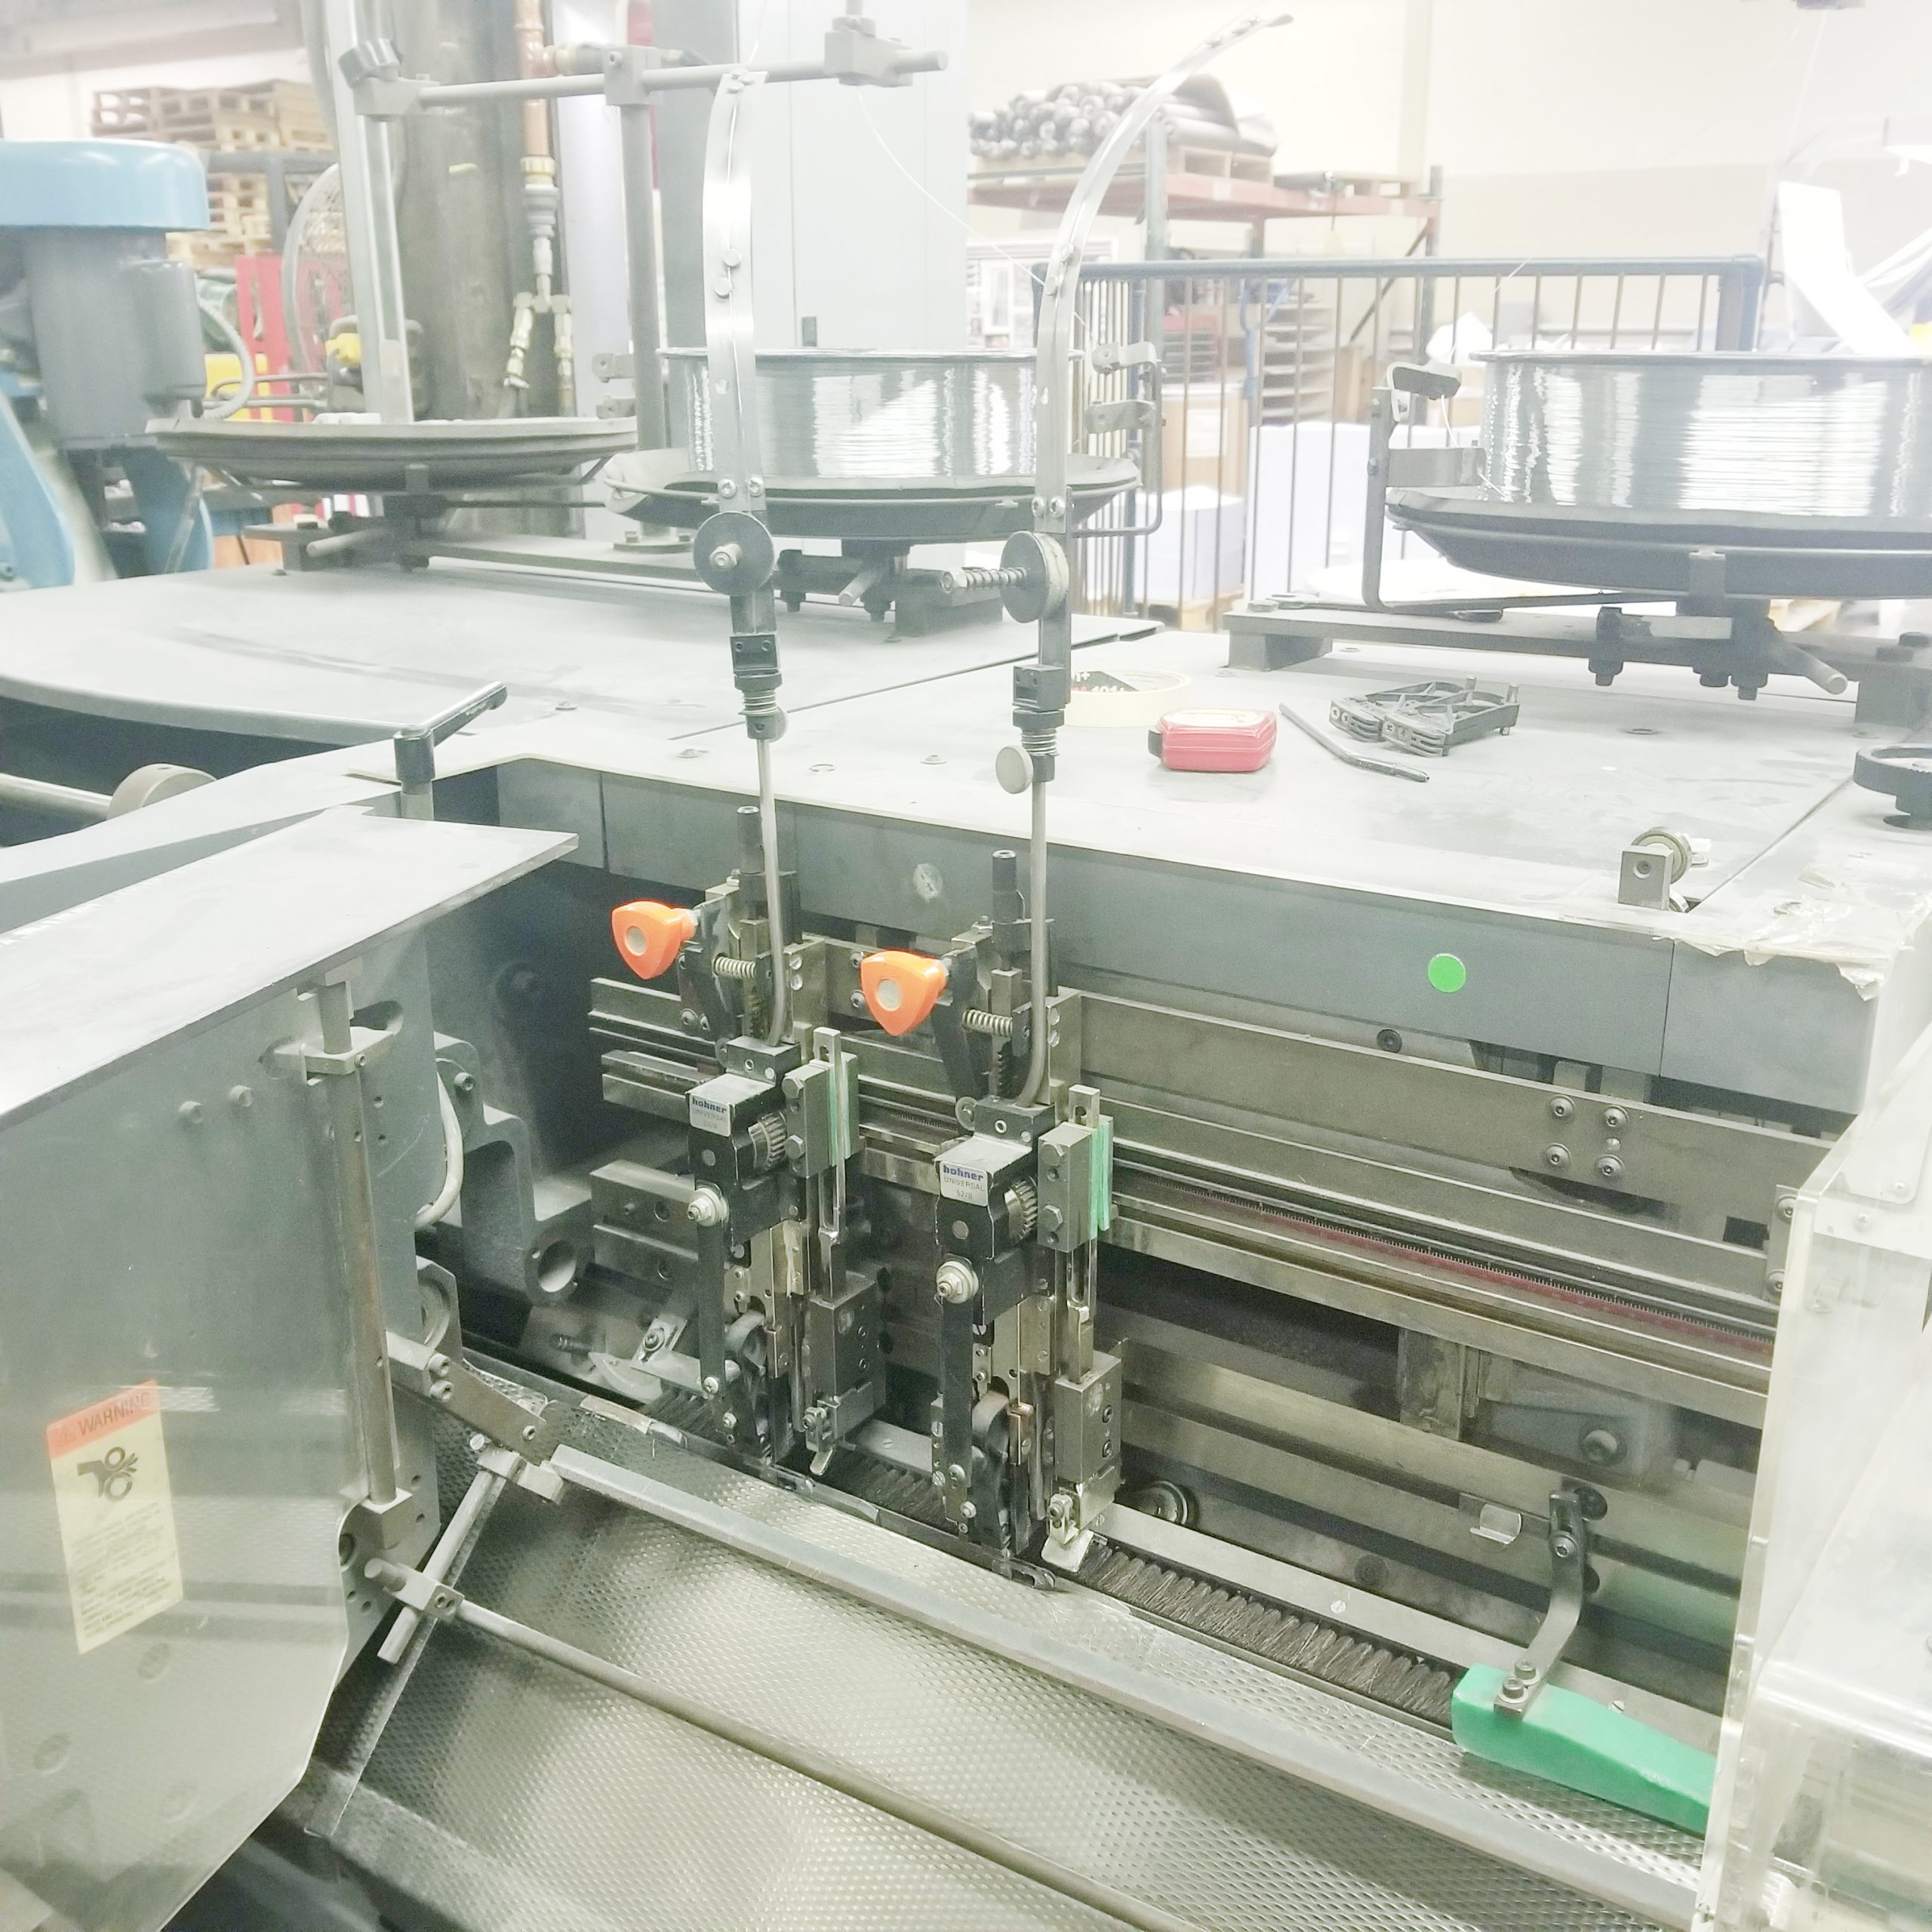 Hiedelberg Stitchmaster ST270 Bookletmaker (used) Item # UE-092021A (New Jersey)